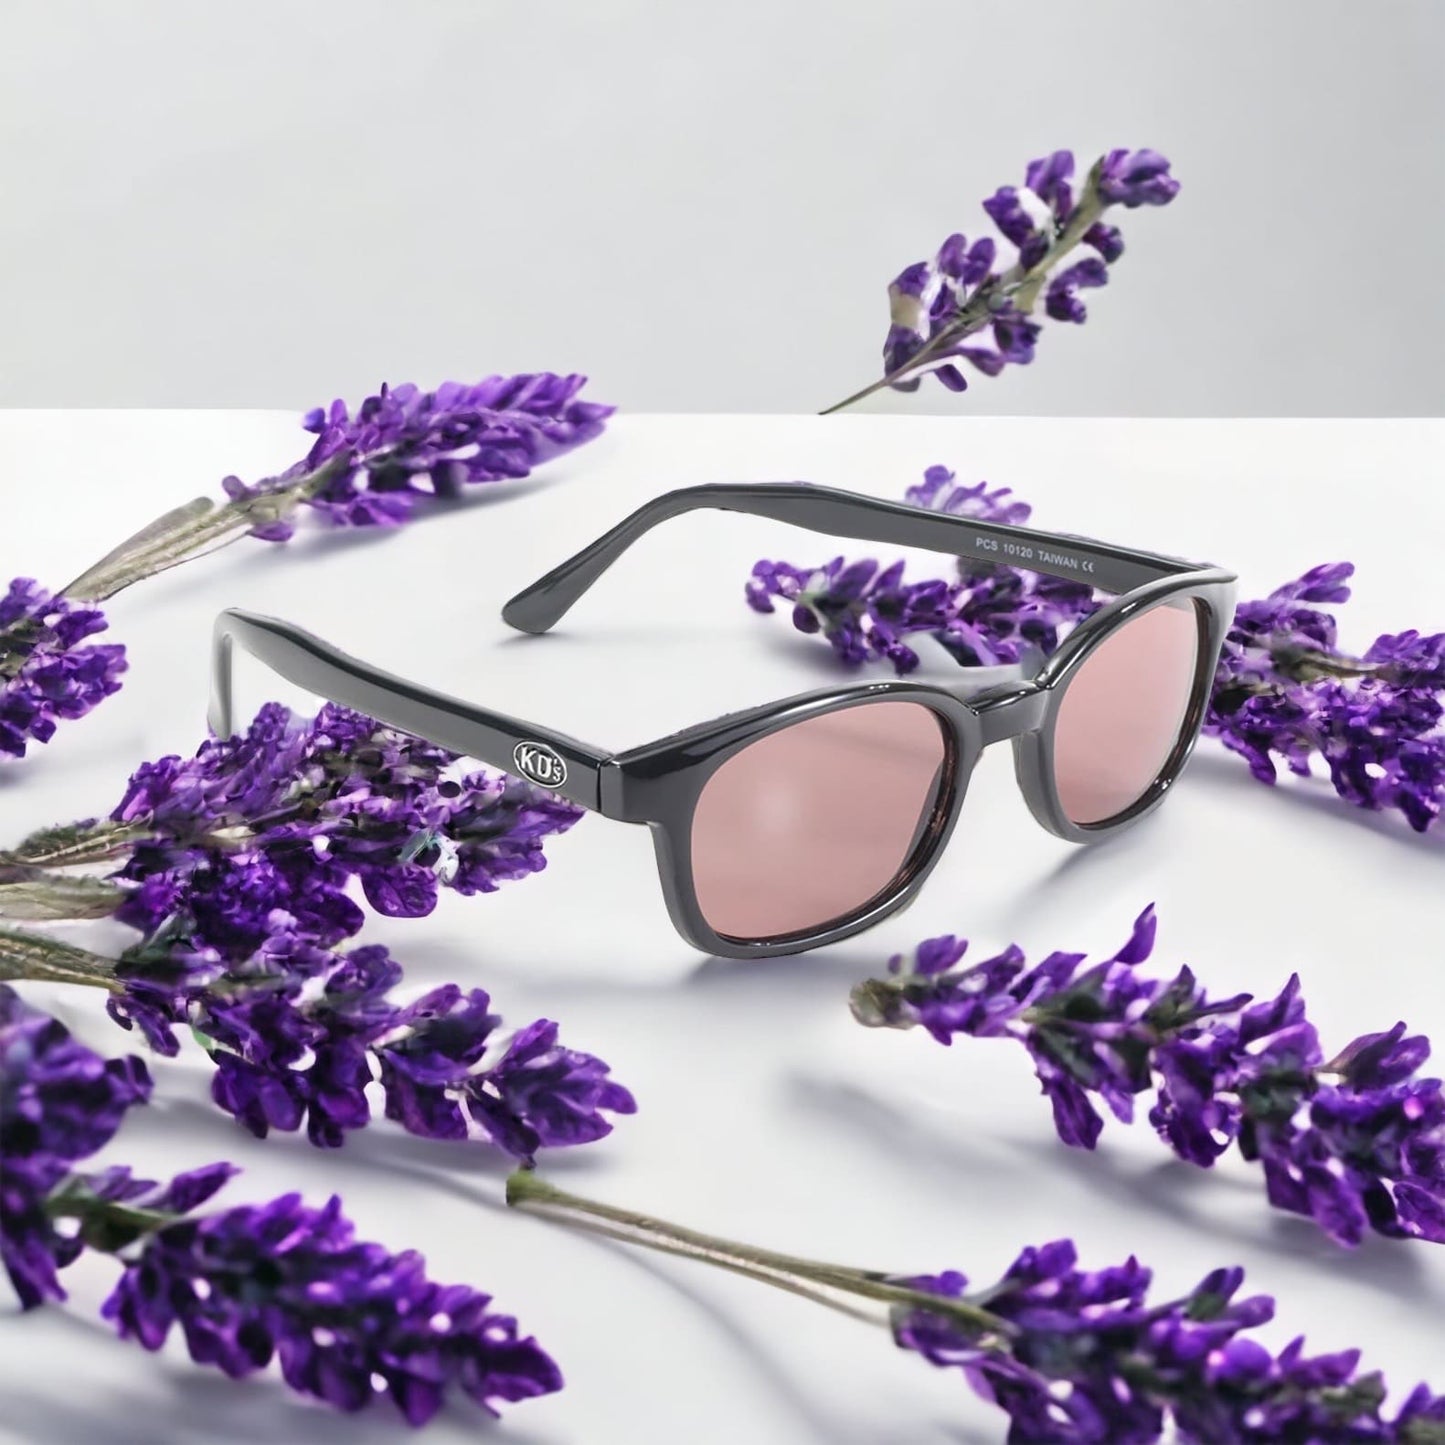 X-KD's 10120 large sunglasses for sportsmen and bikers with a refined black frame and pink tinted polycarbonate lenses on a lavender bed.